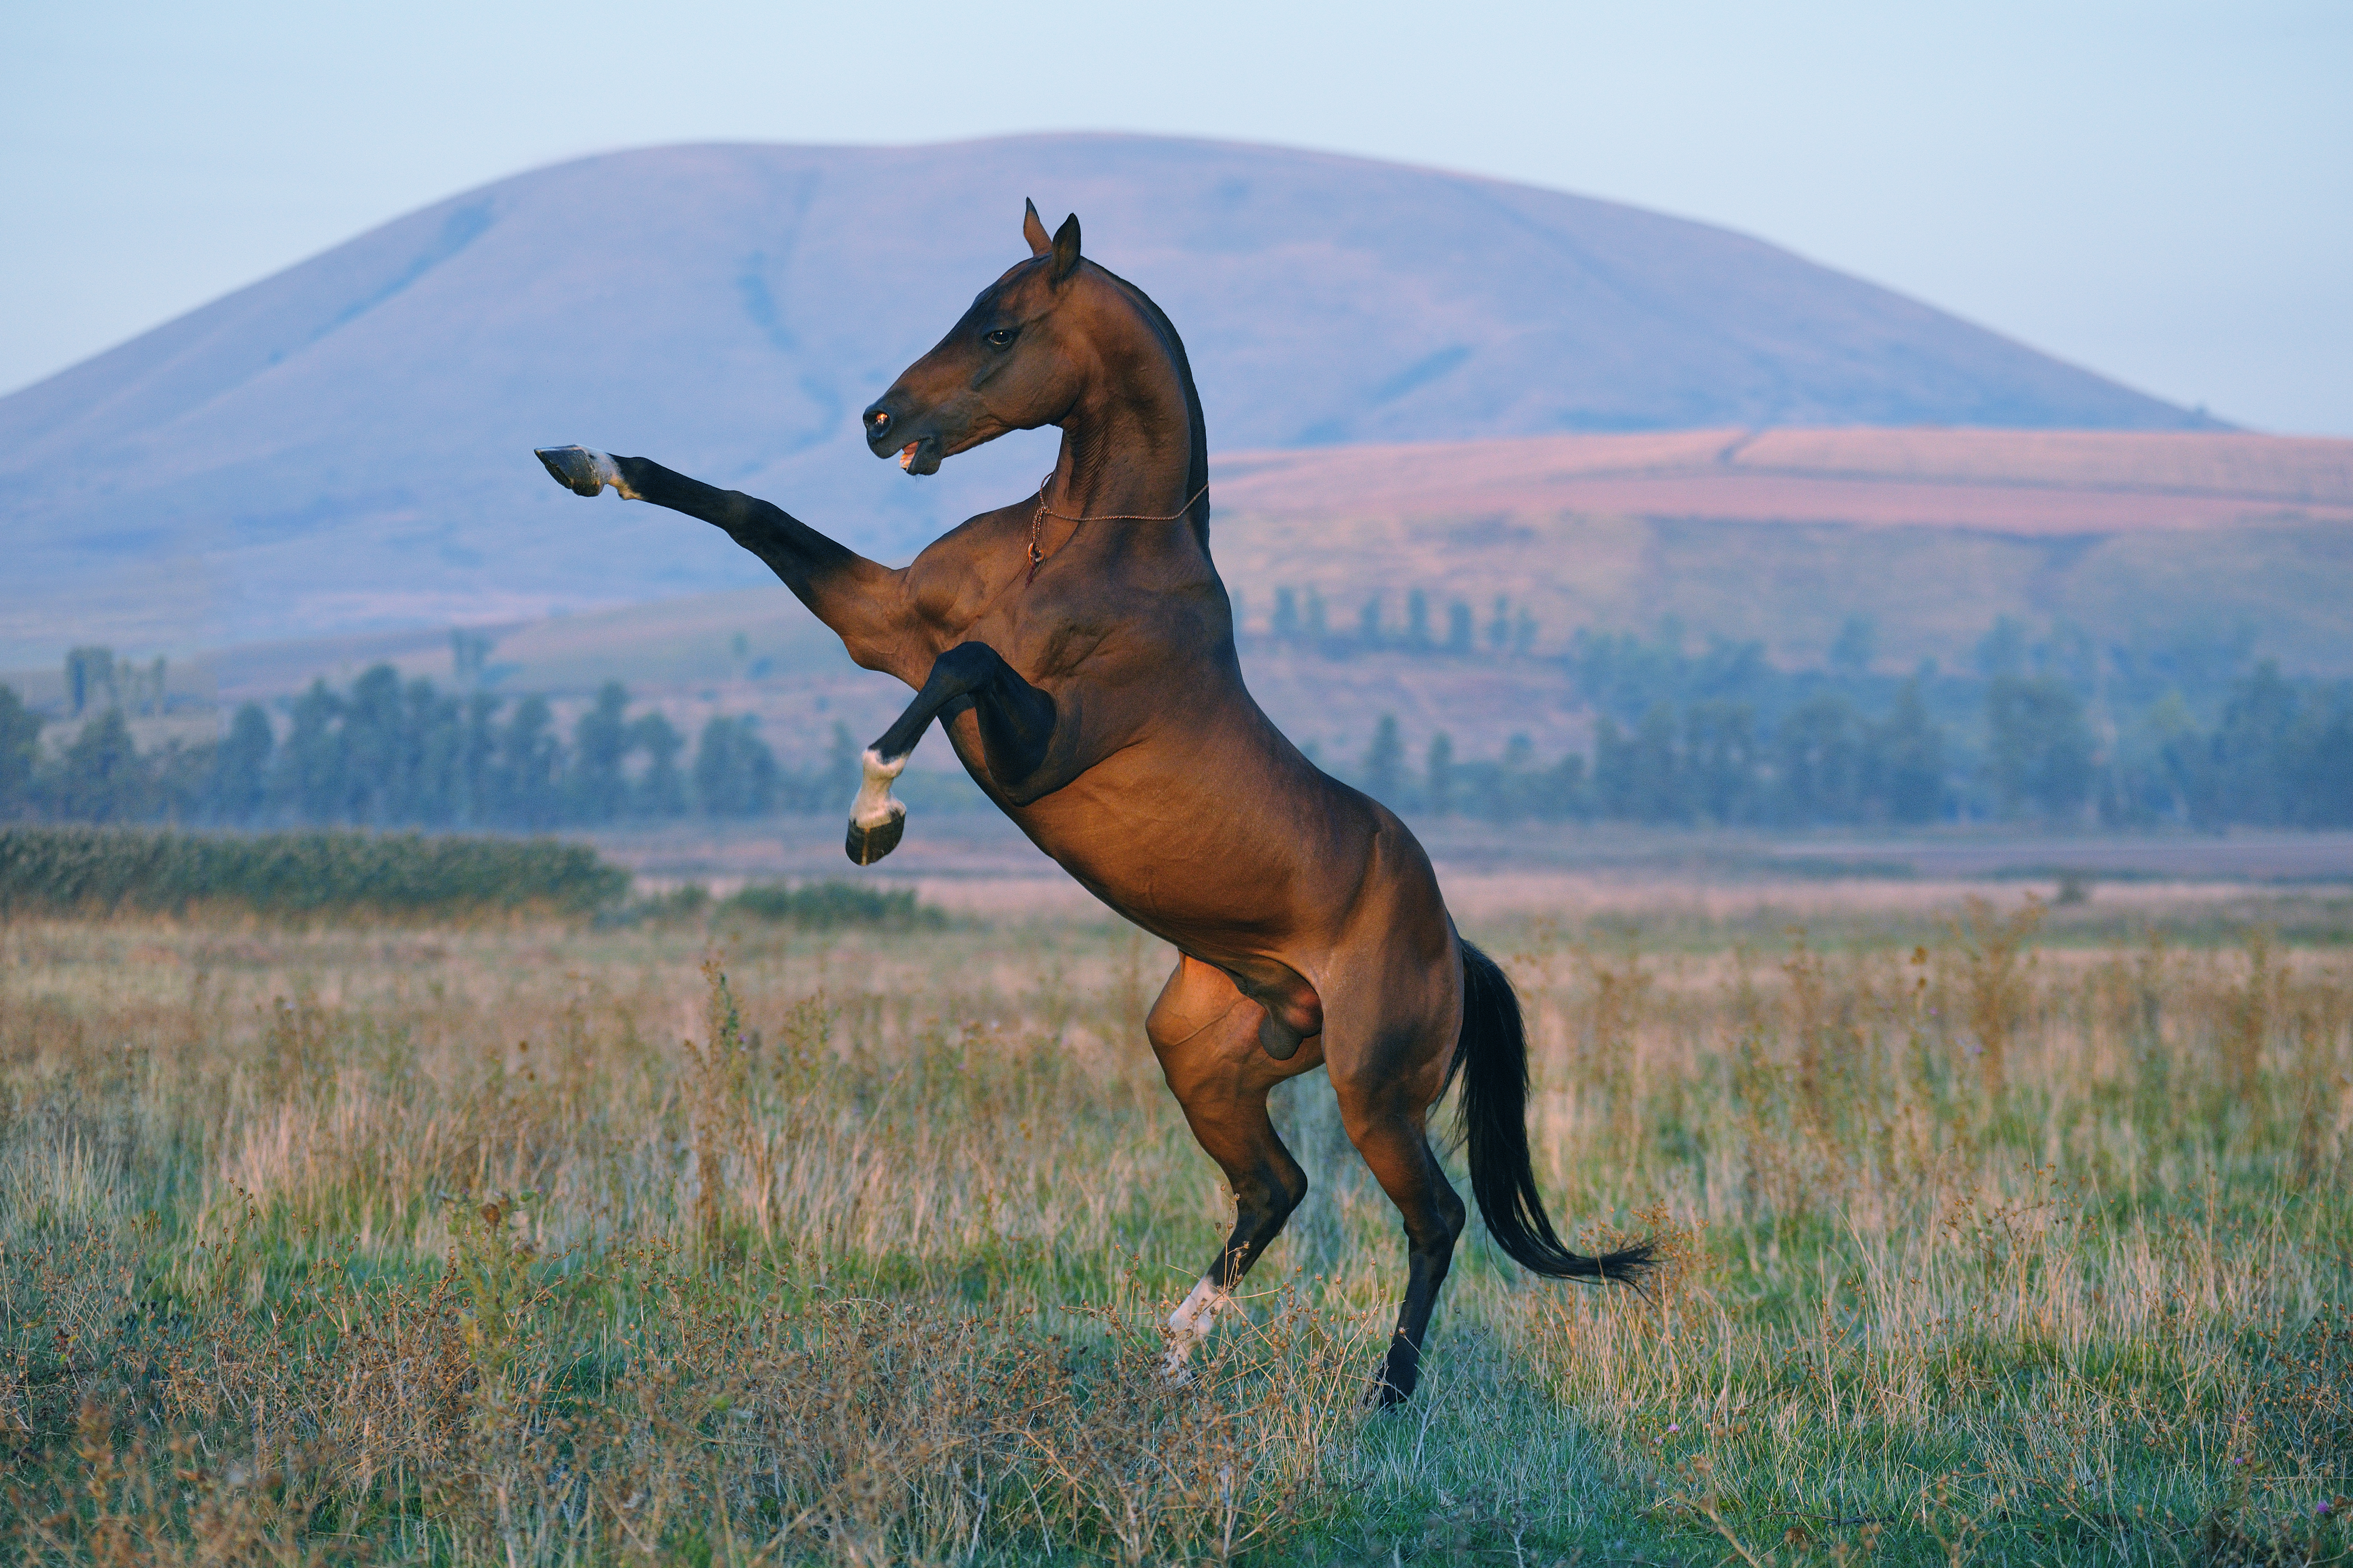 Official breeding of the Akhal-Teke began following the incorporation of Turkmenistan into the Russian Empire in 1881. © arthorse / Shutterstock